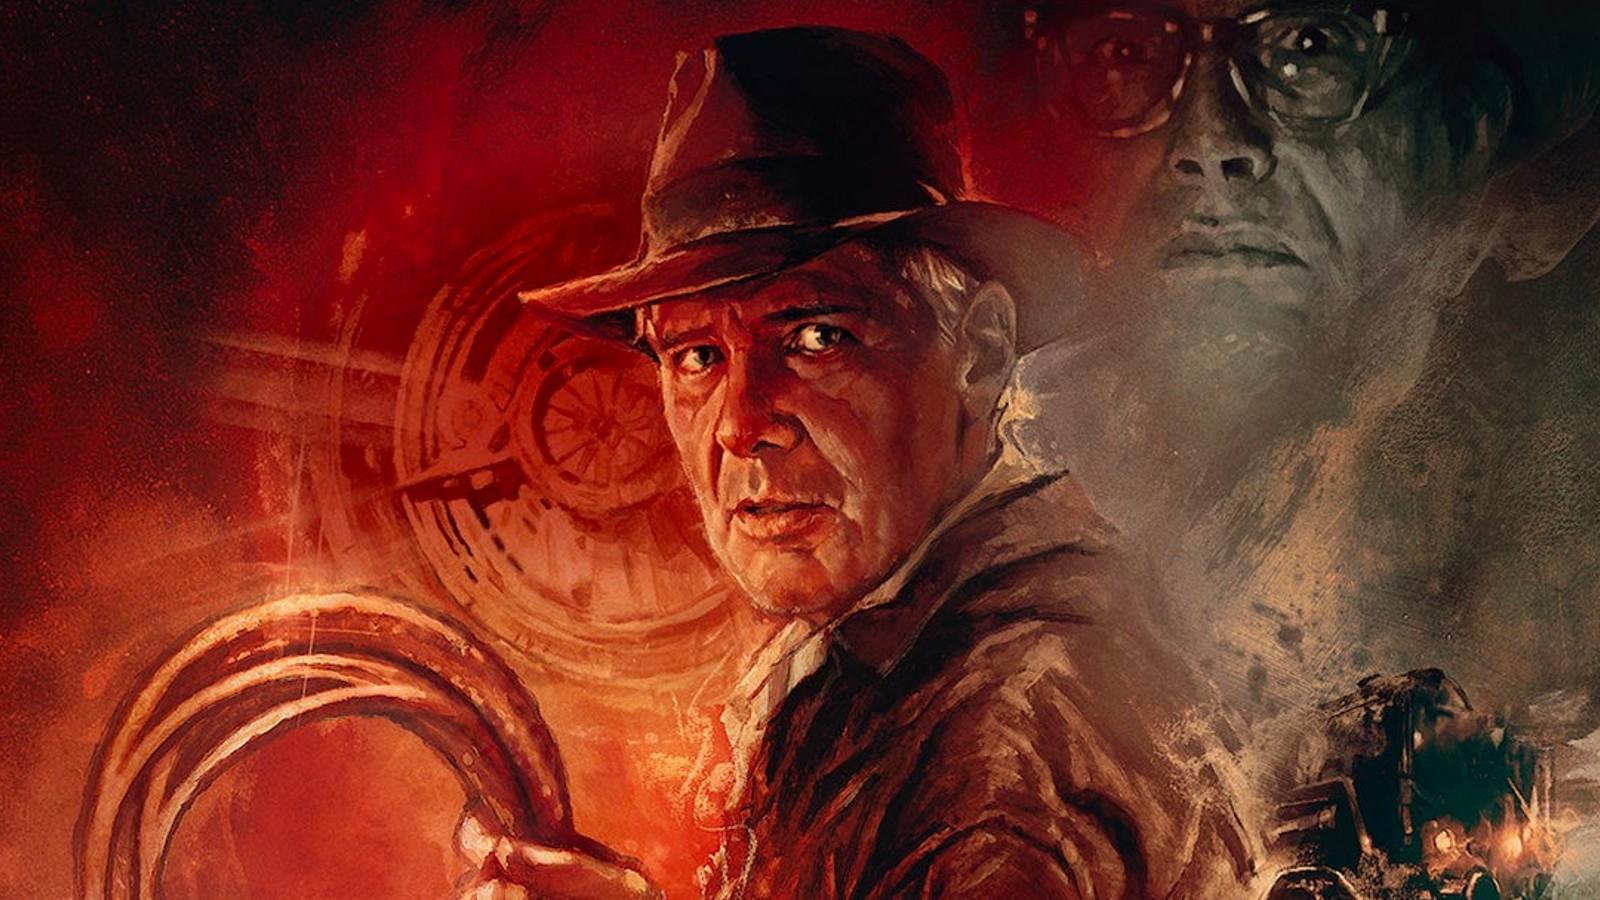 Harrison Ford on the poster for Indiana Jones 5: The Dial of Destiny